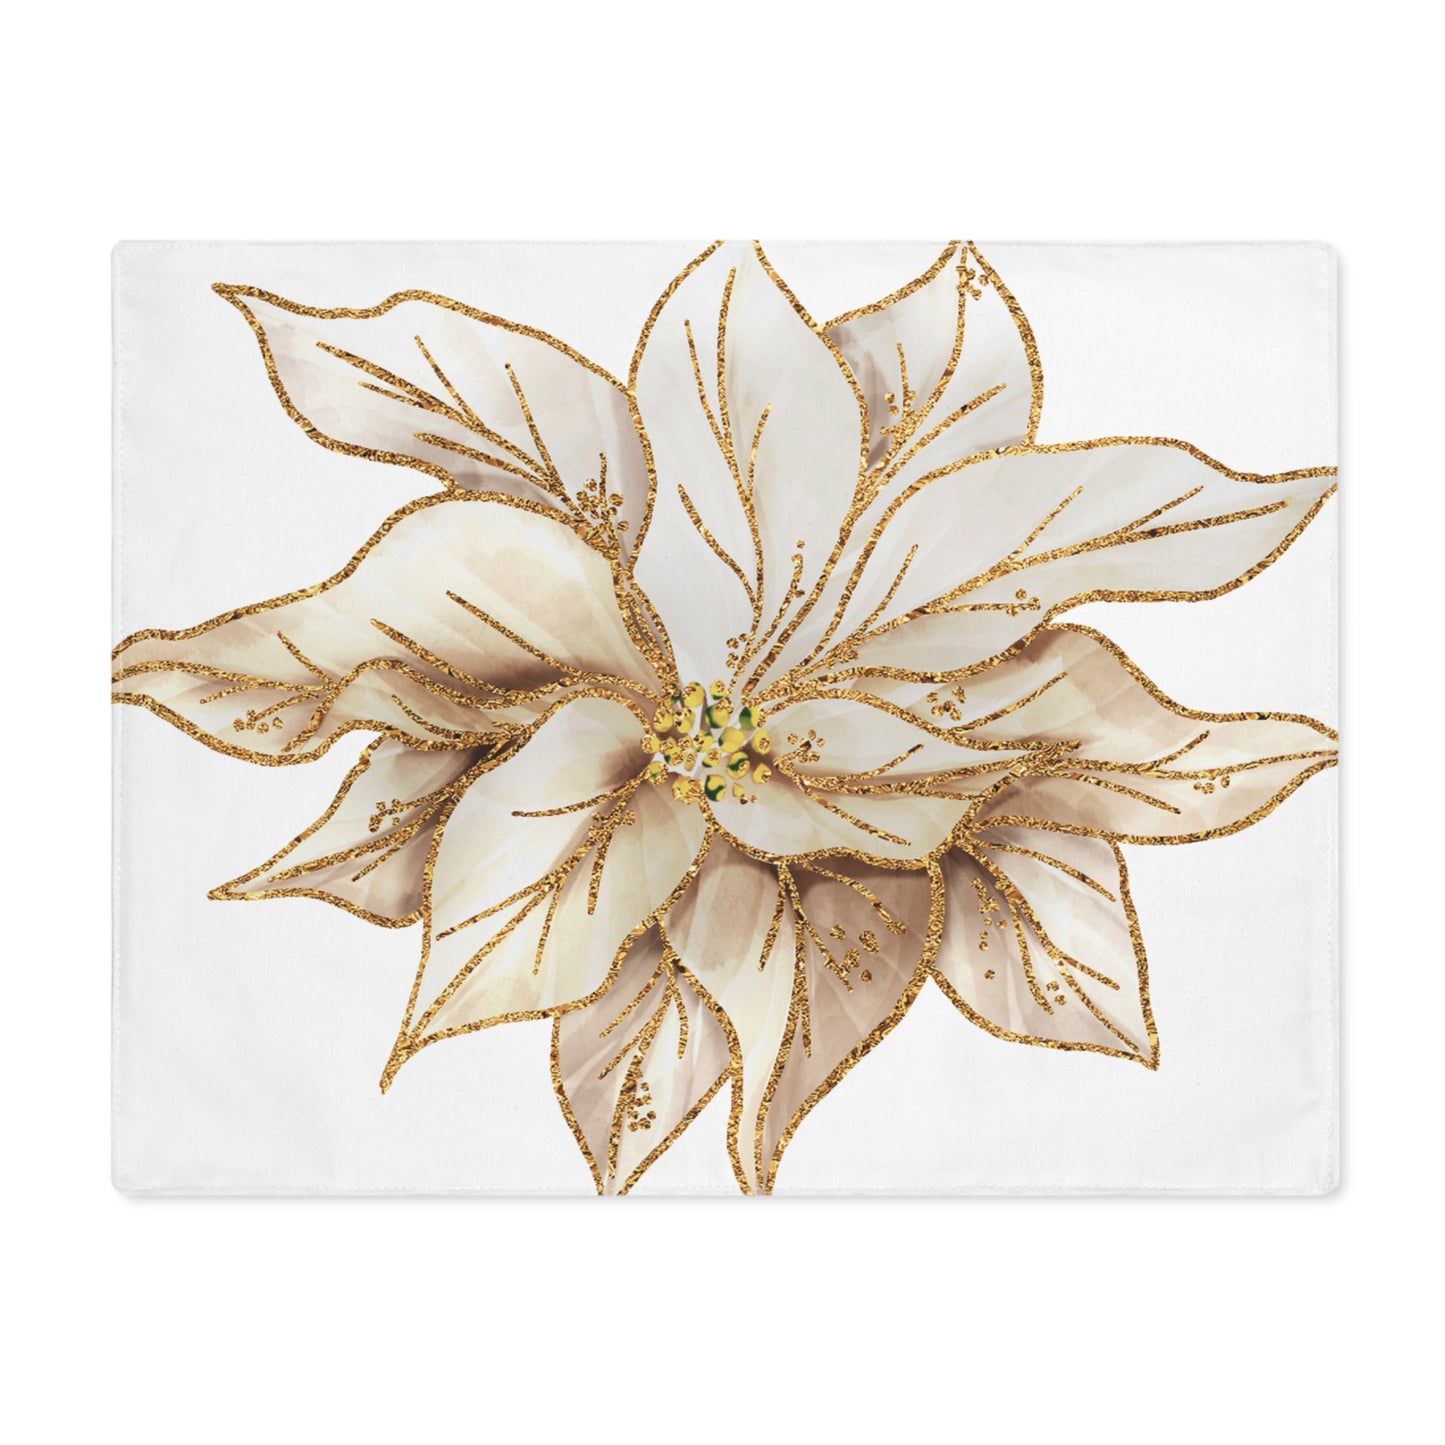 White and Gold Poinsettia Christmas Placemat, 1pc